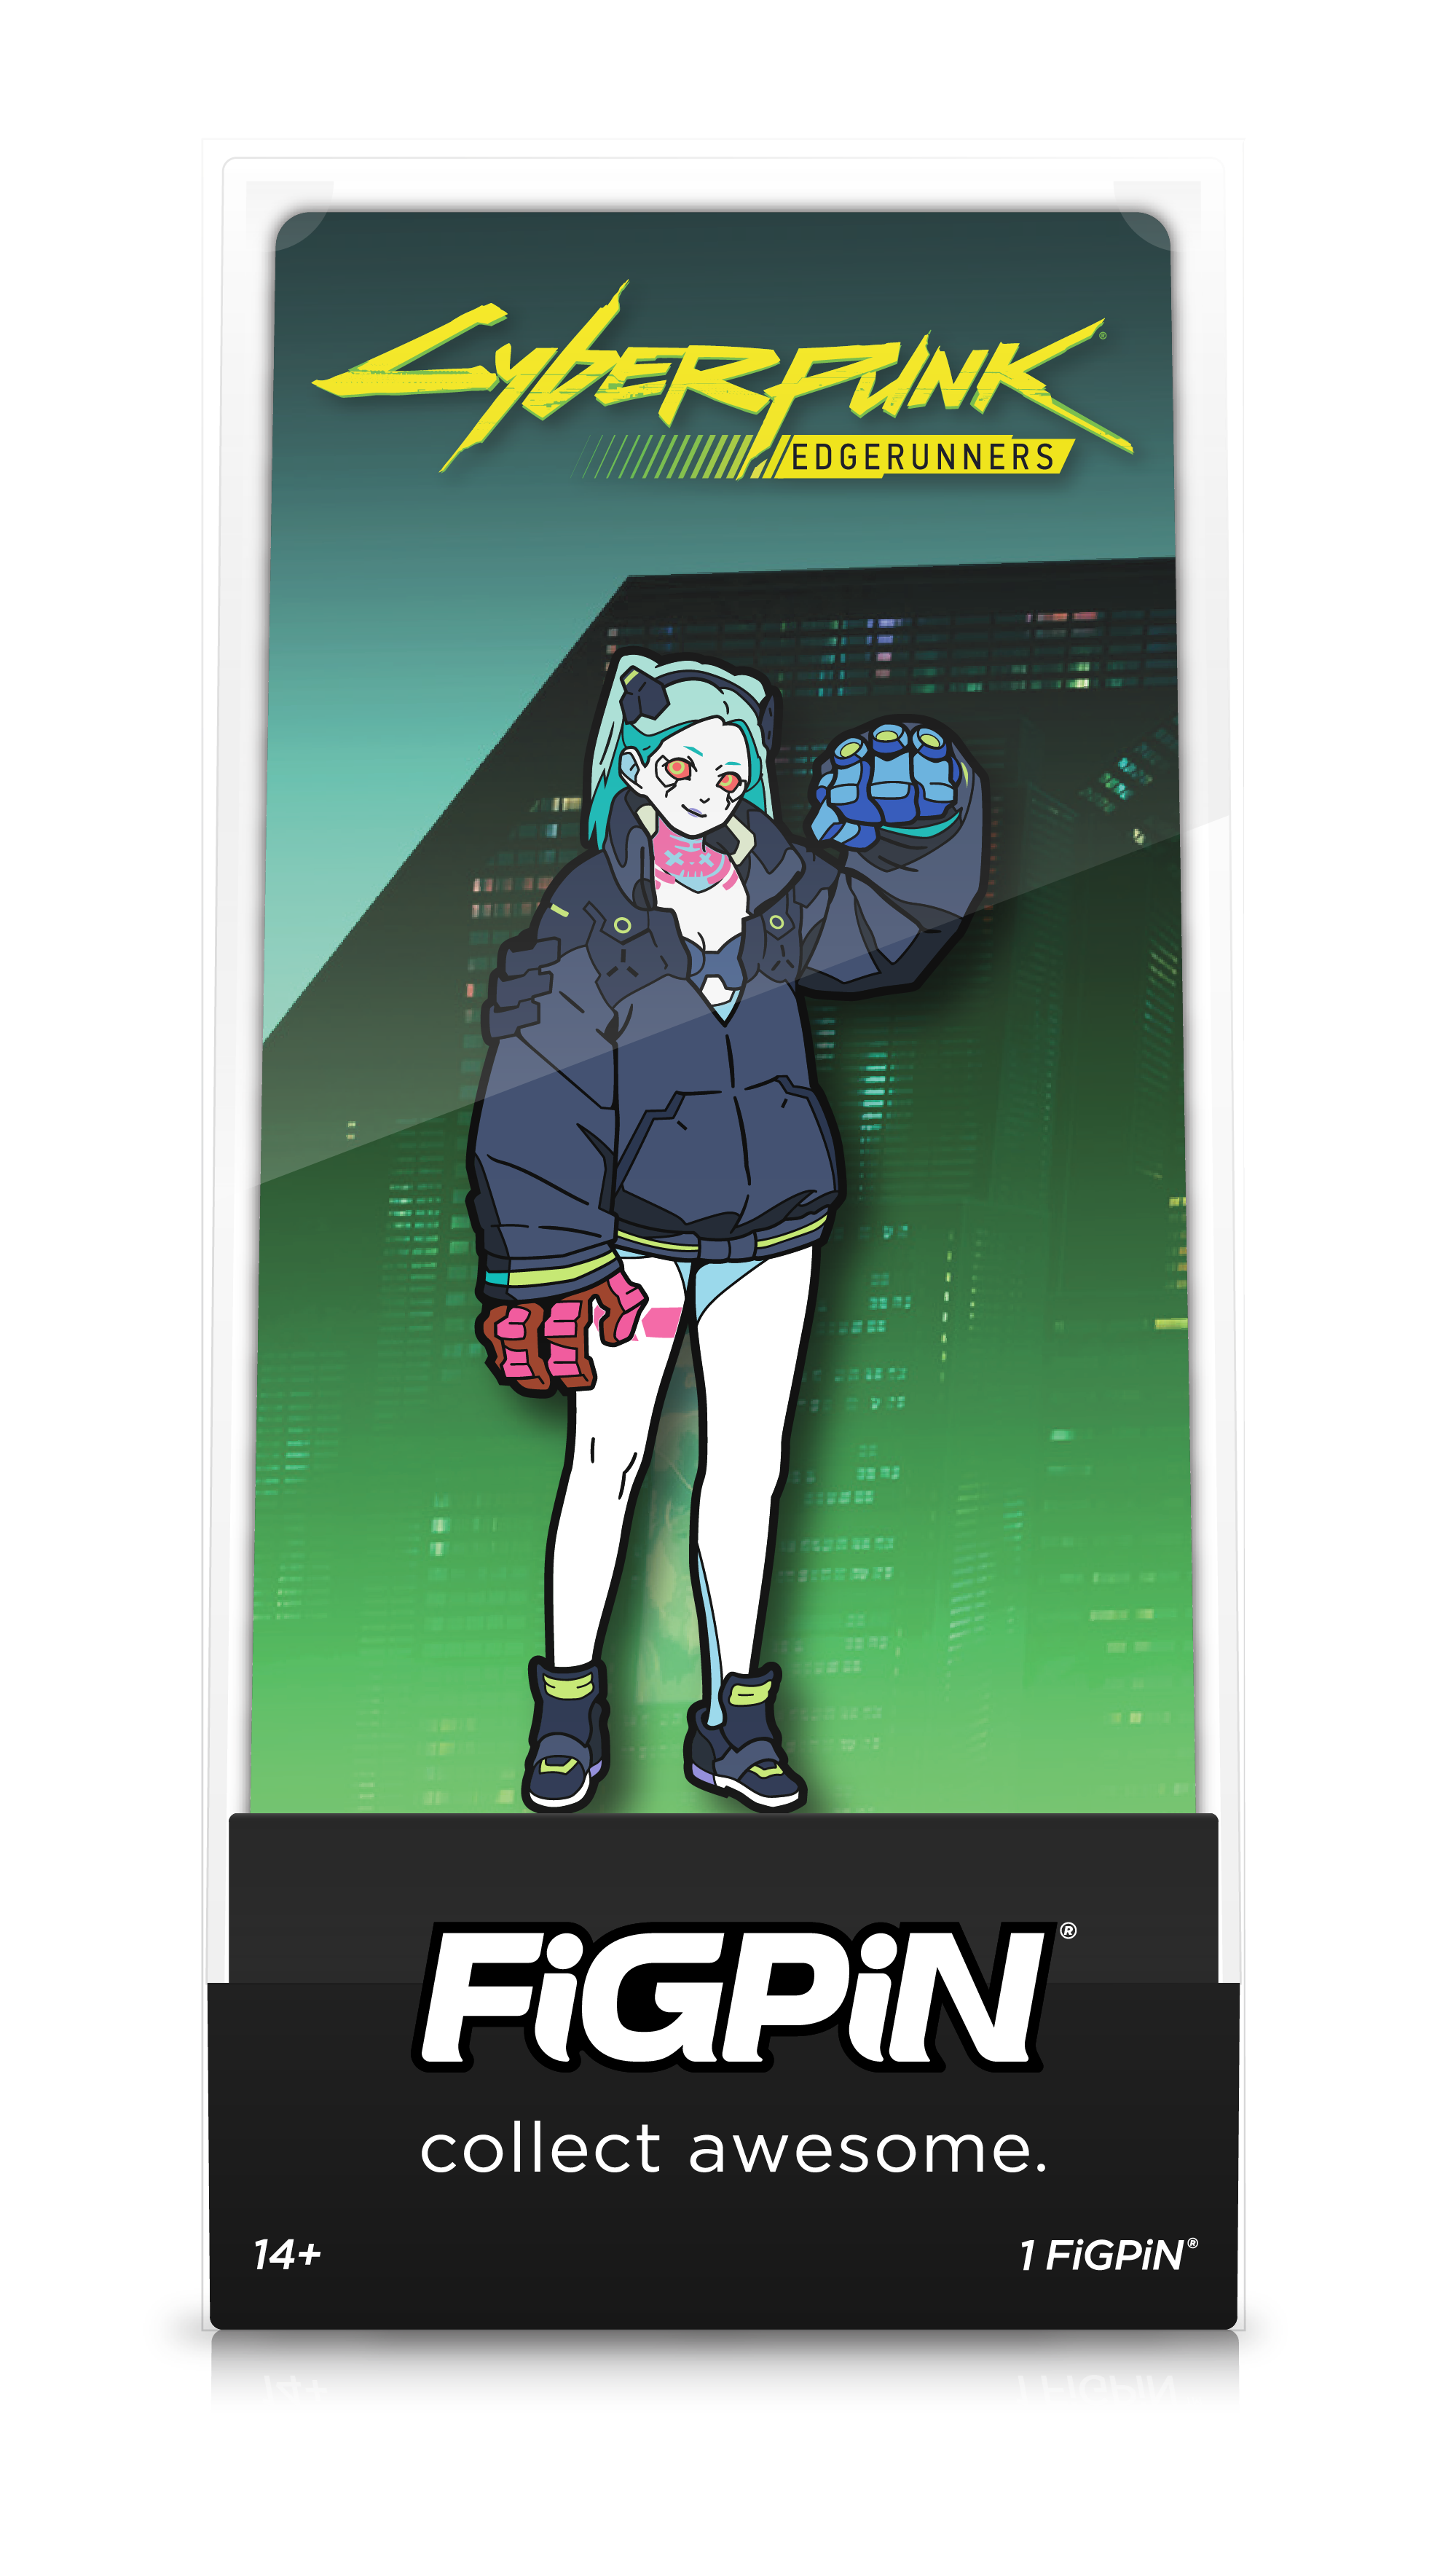 Front view of Rebecca enamel pin inside FiGPiN Display case reading “FiGPiN - collect awesome”